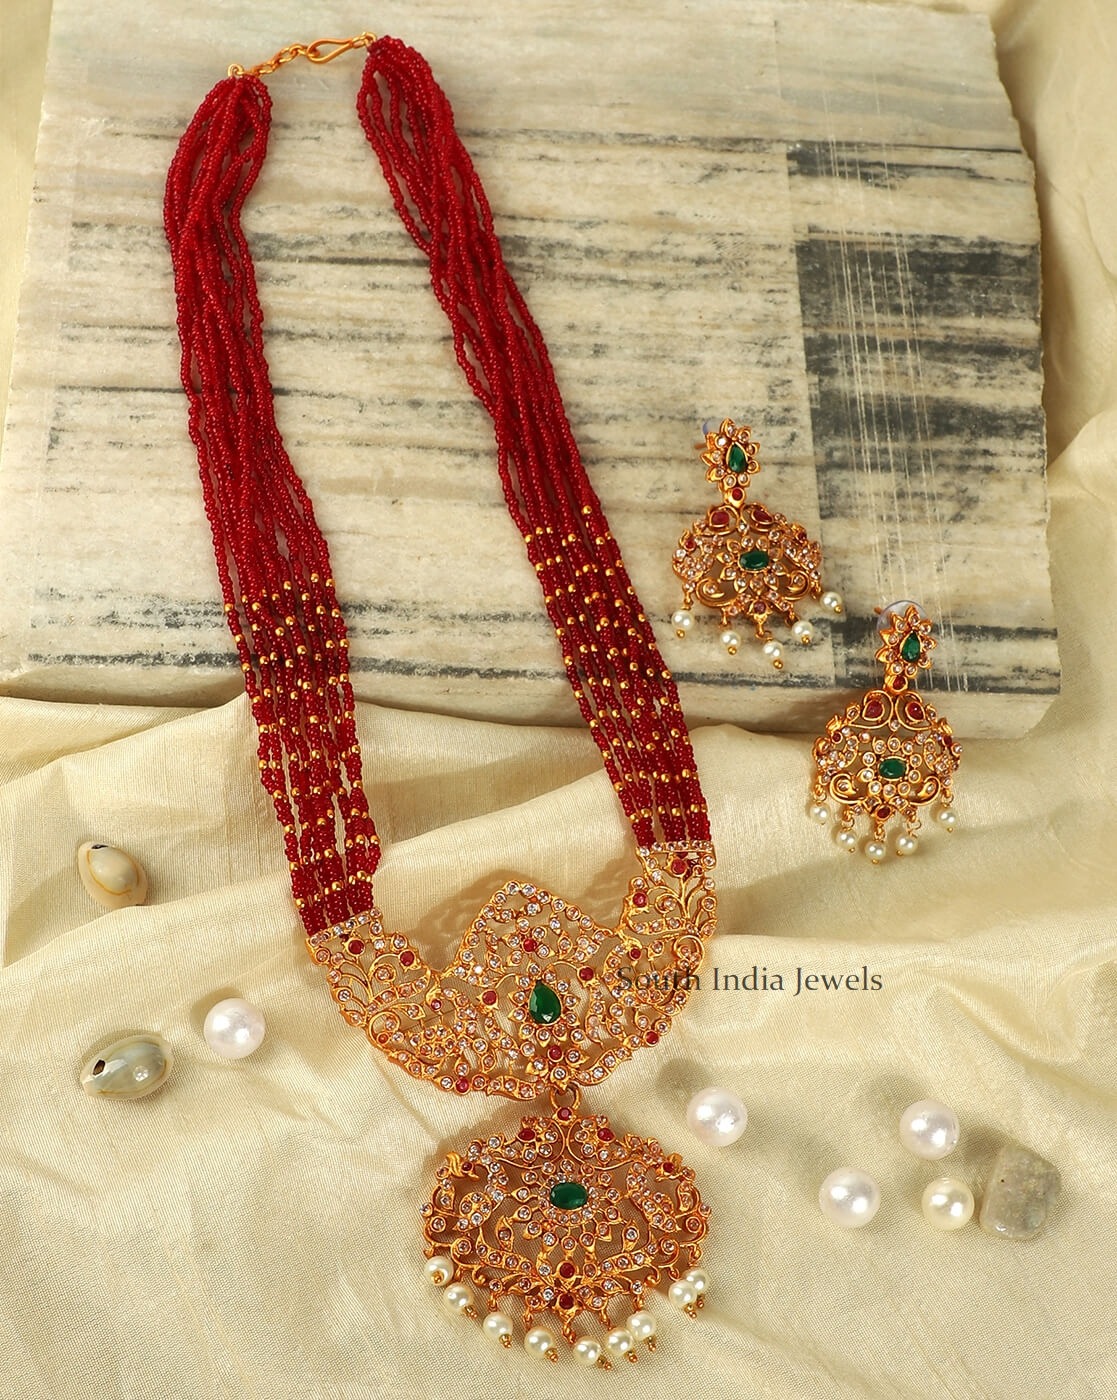 Details 78+ long red beaded necklace - POPPY